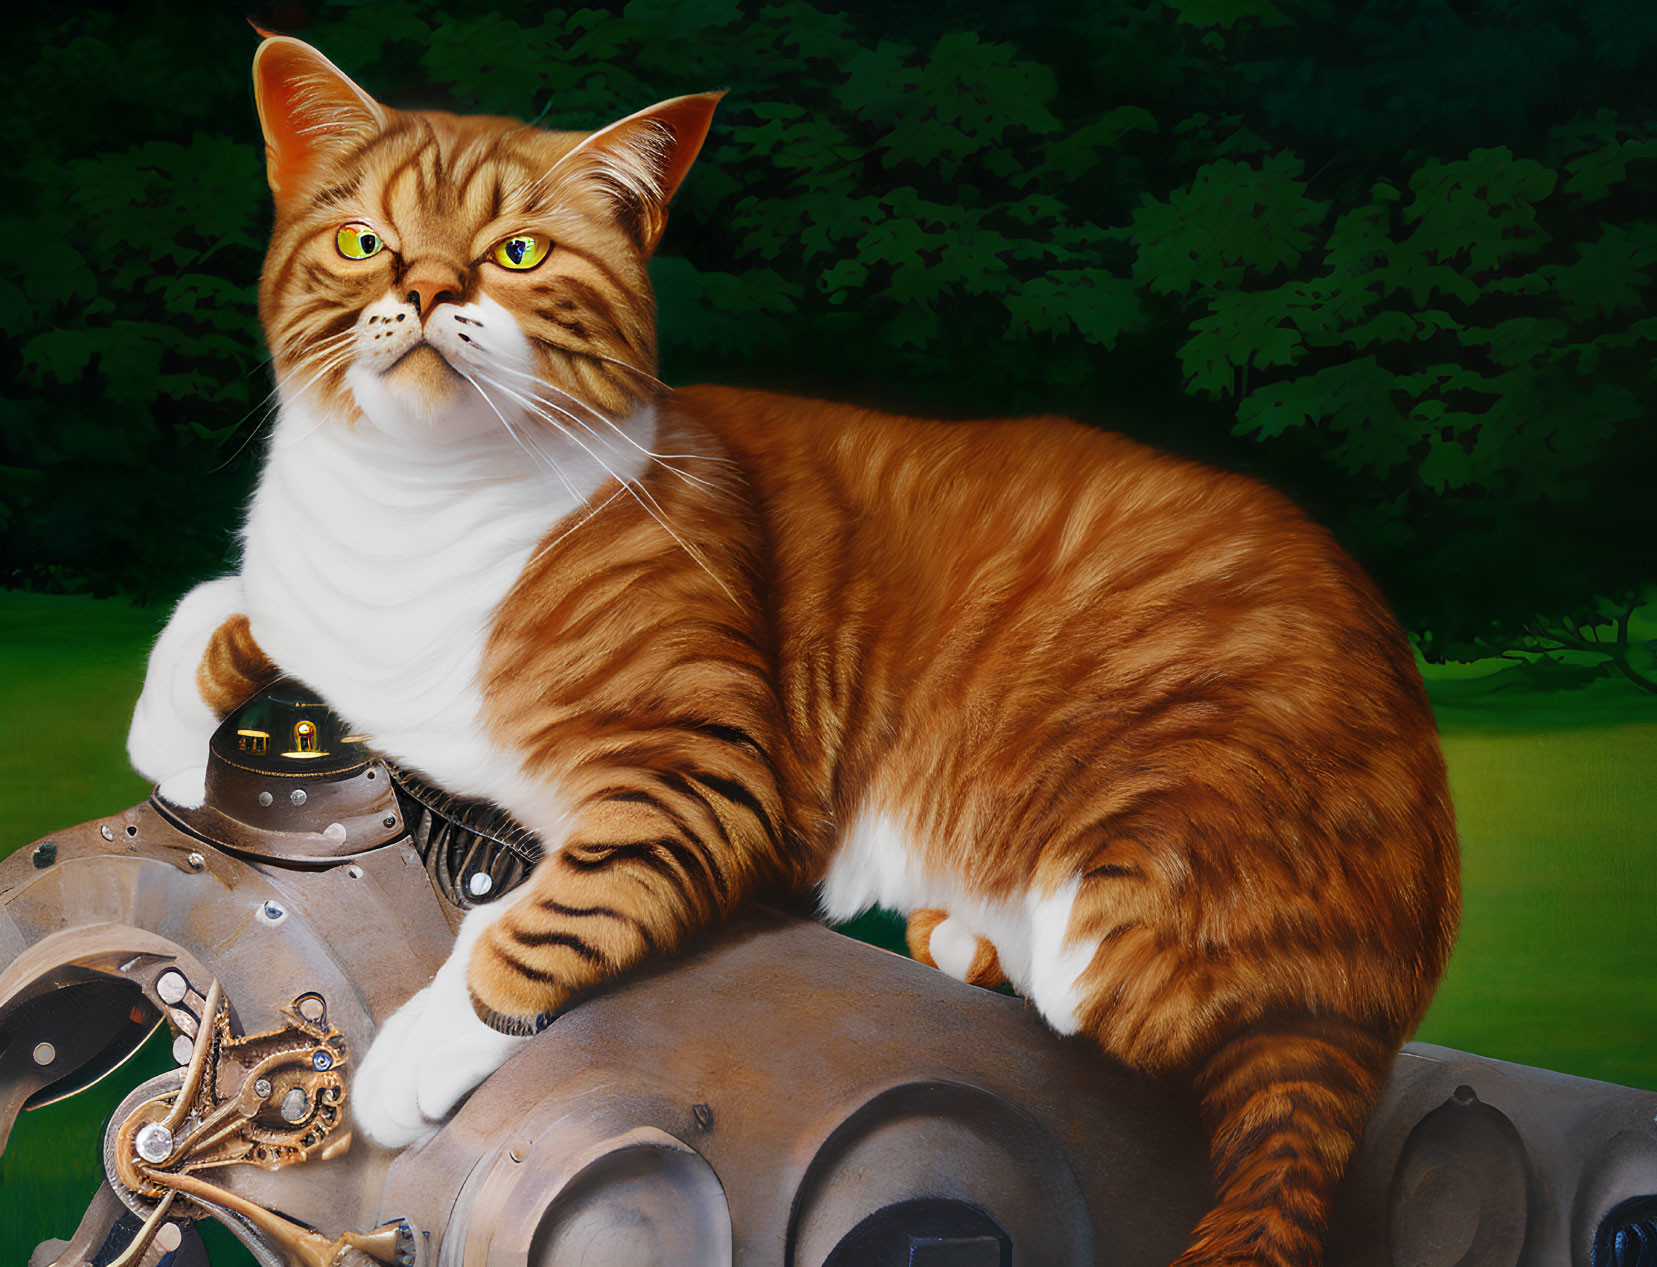 Orange Tabby Cat with Unique Markings on Mechanical Contraption in Green Foliage